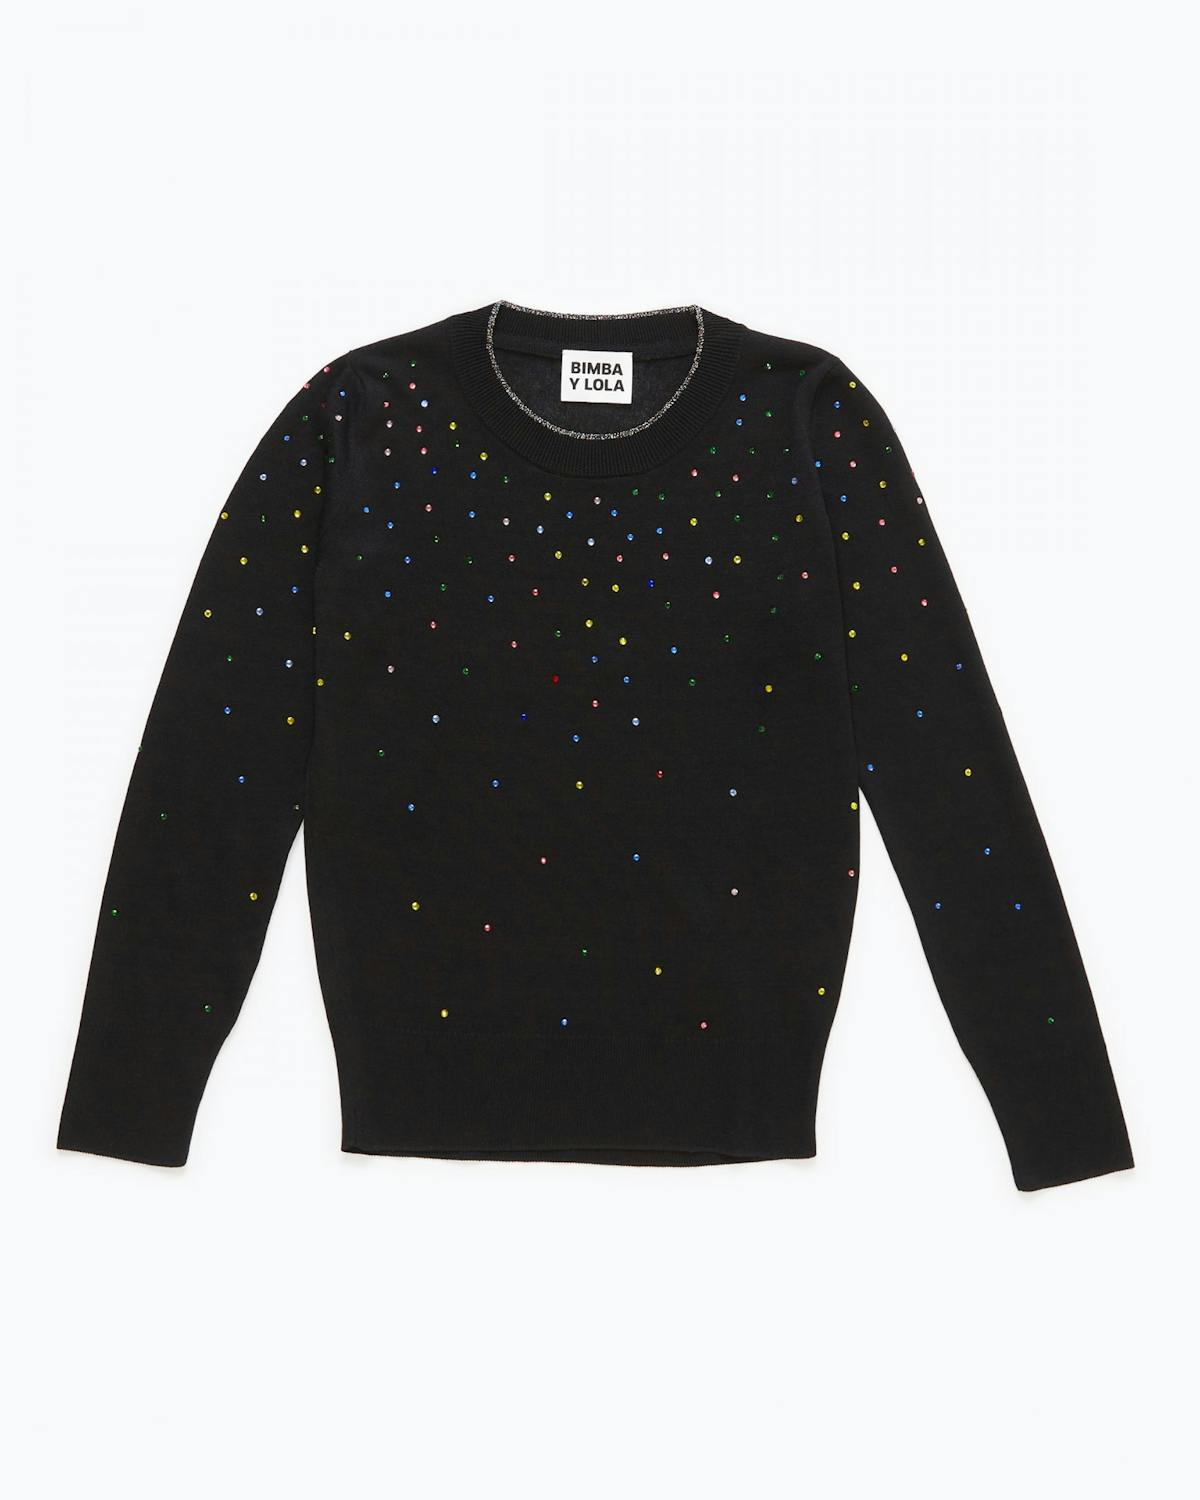 Christmas Jumper Day 2020: the best Christmas jumpers to shop now